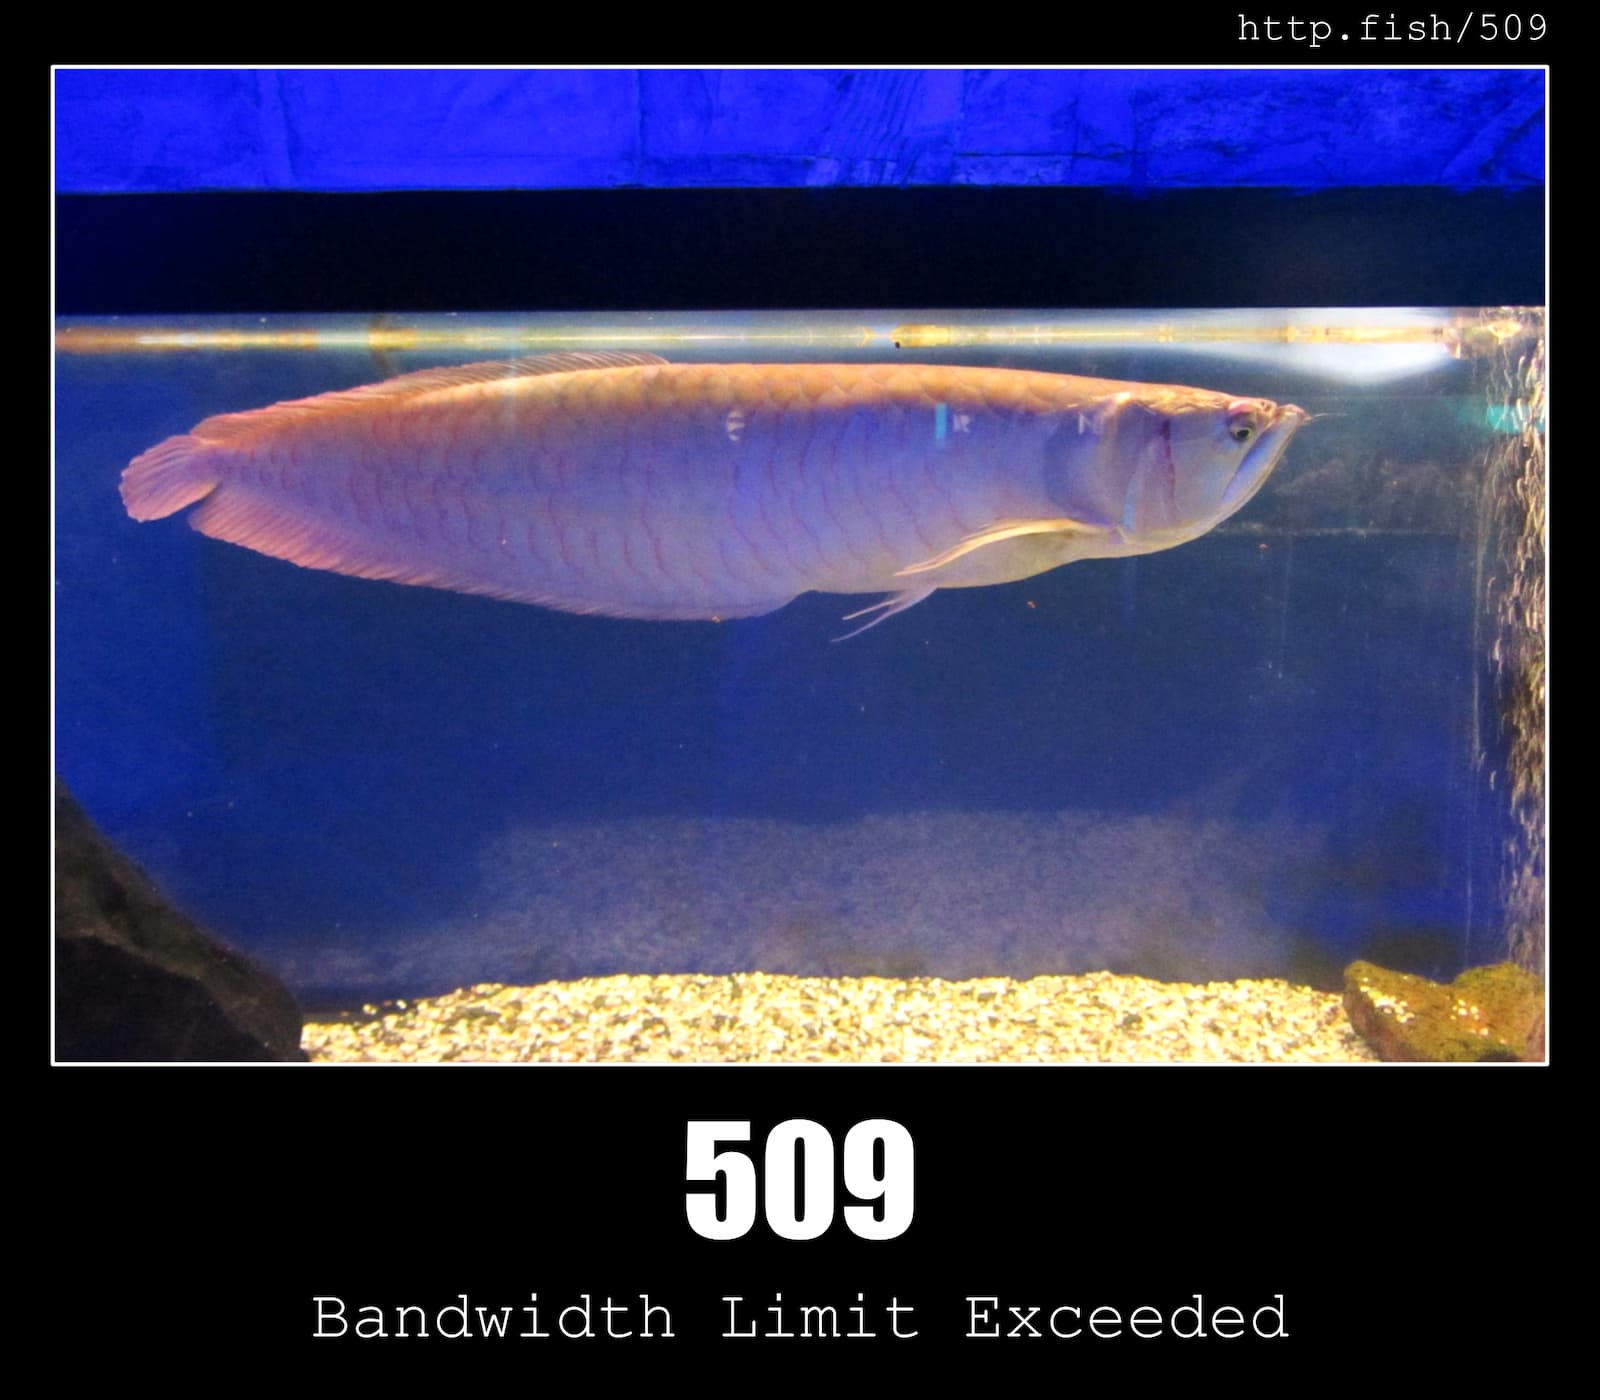 HTTP Status Code 509 Bandwidth Limit Exceeded & Fish